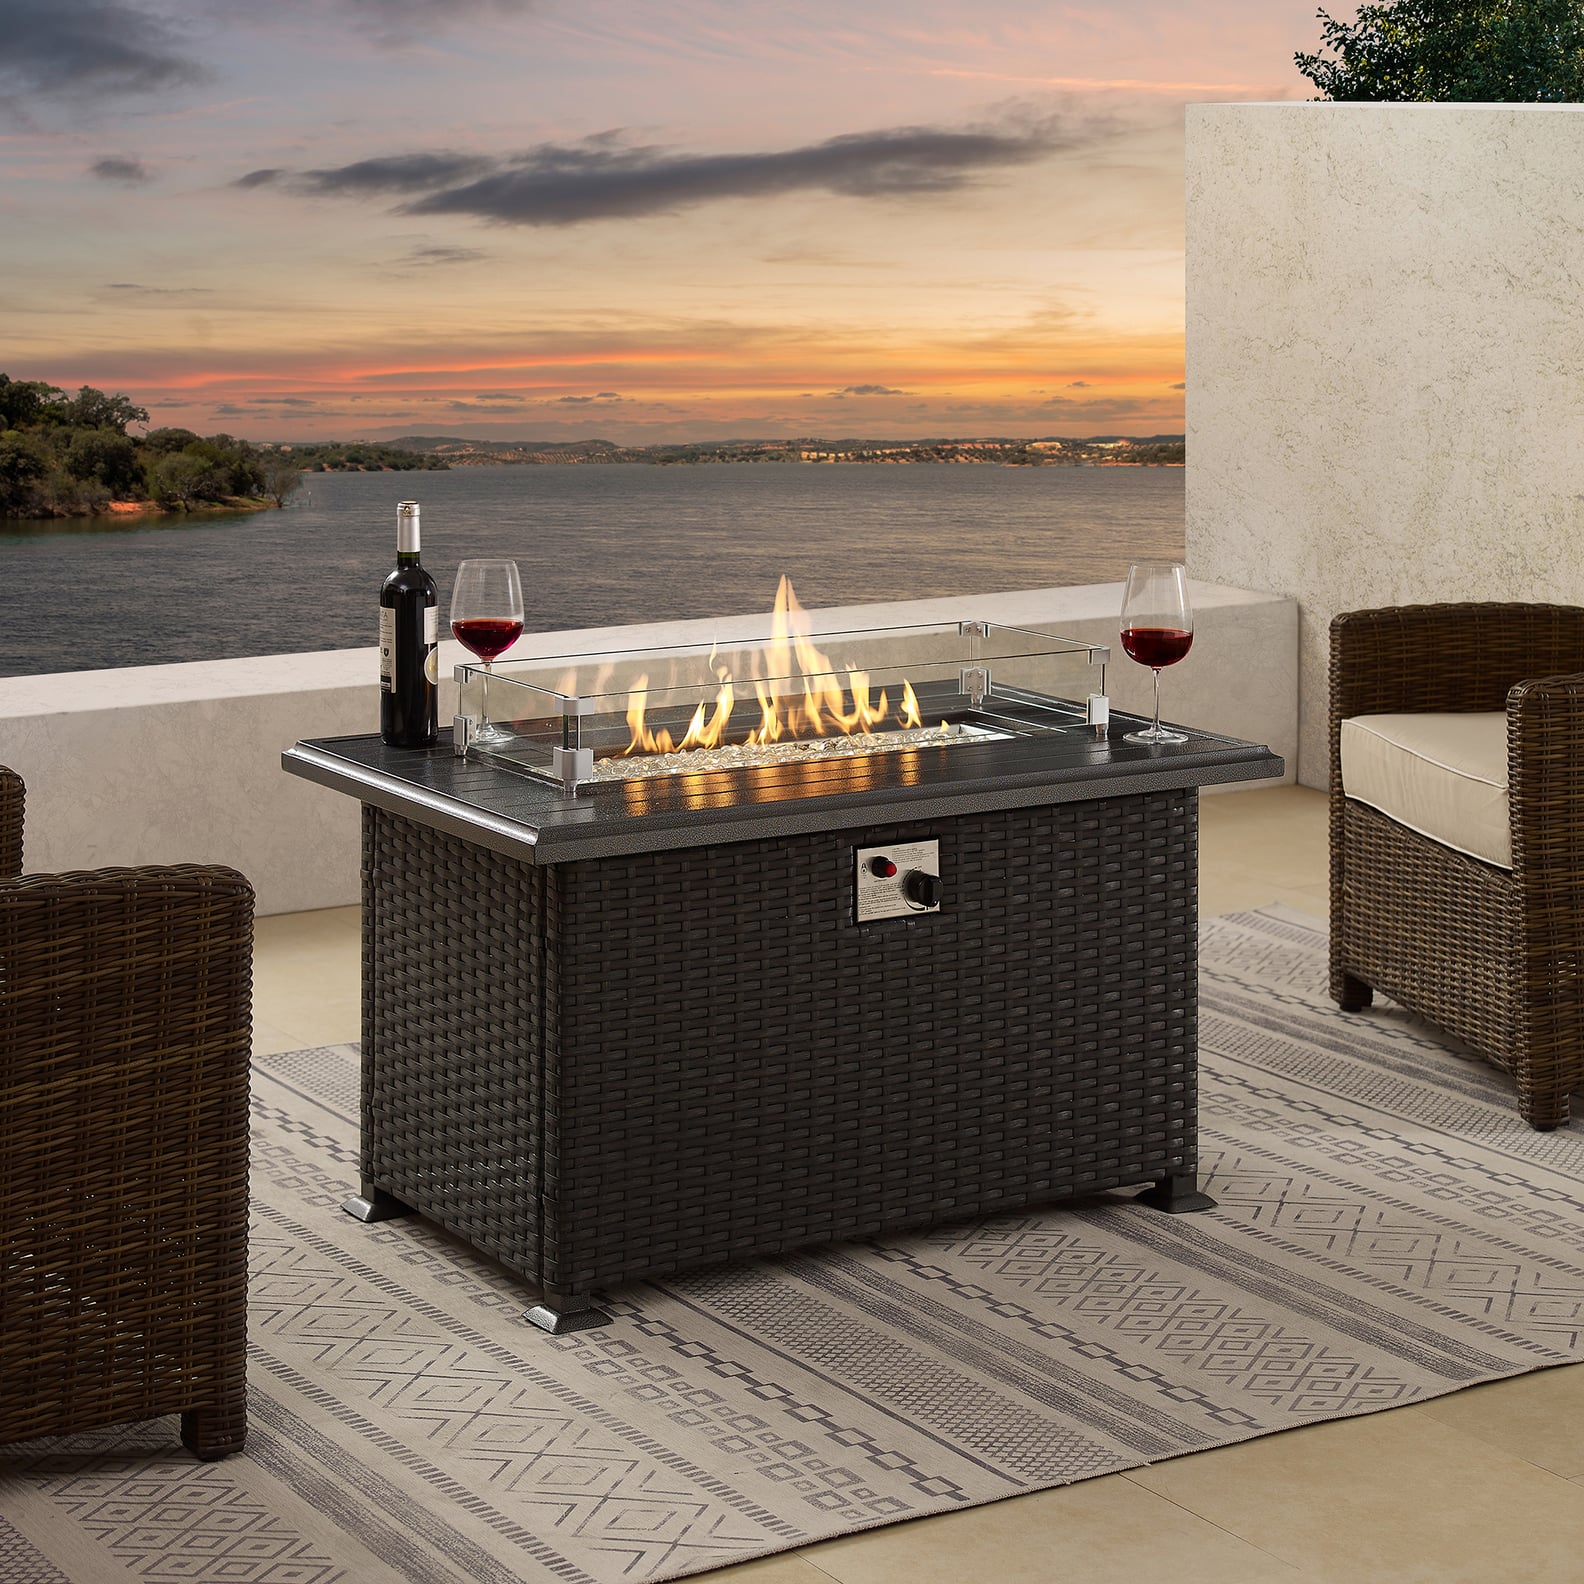 10 Best Fire Tables For Your Backyard or Patio | POPSUGAR Home